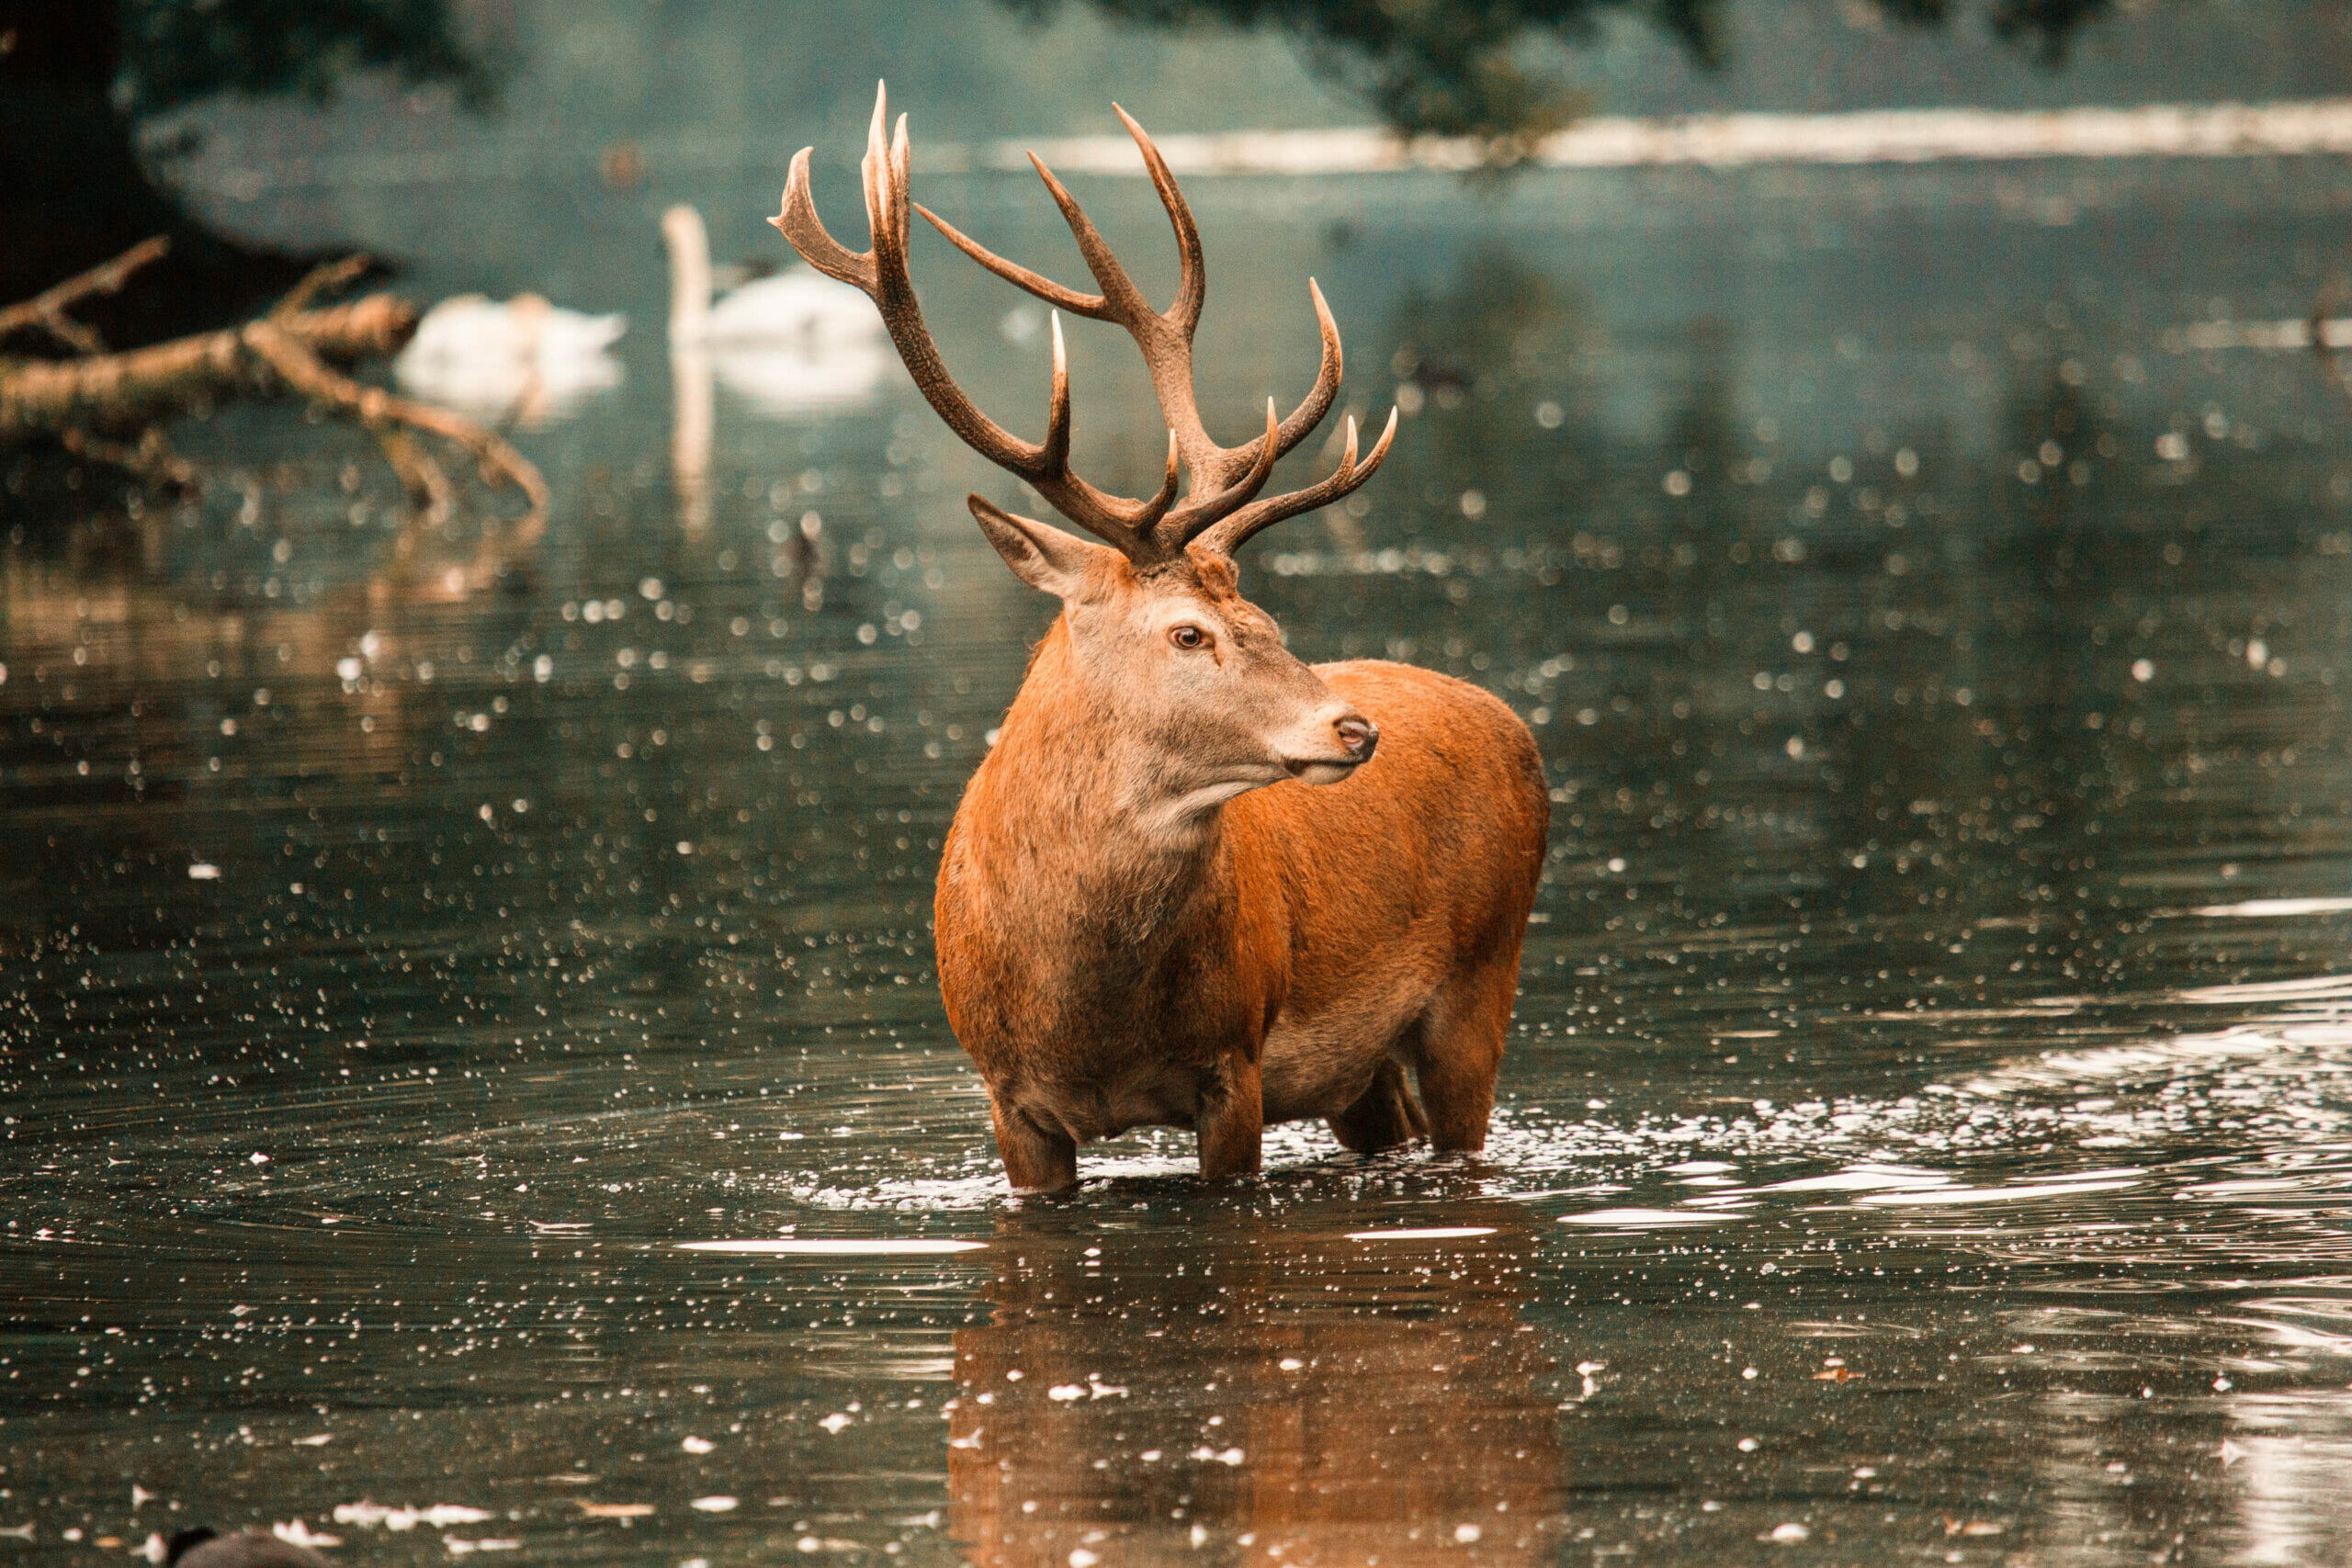 The king of the forest red deer hq nude image